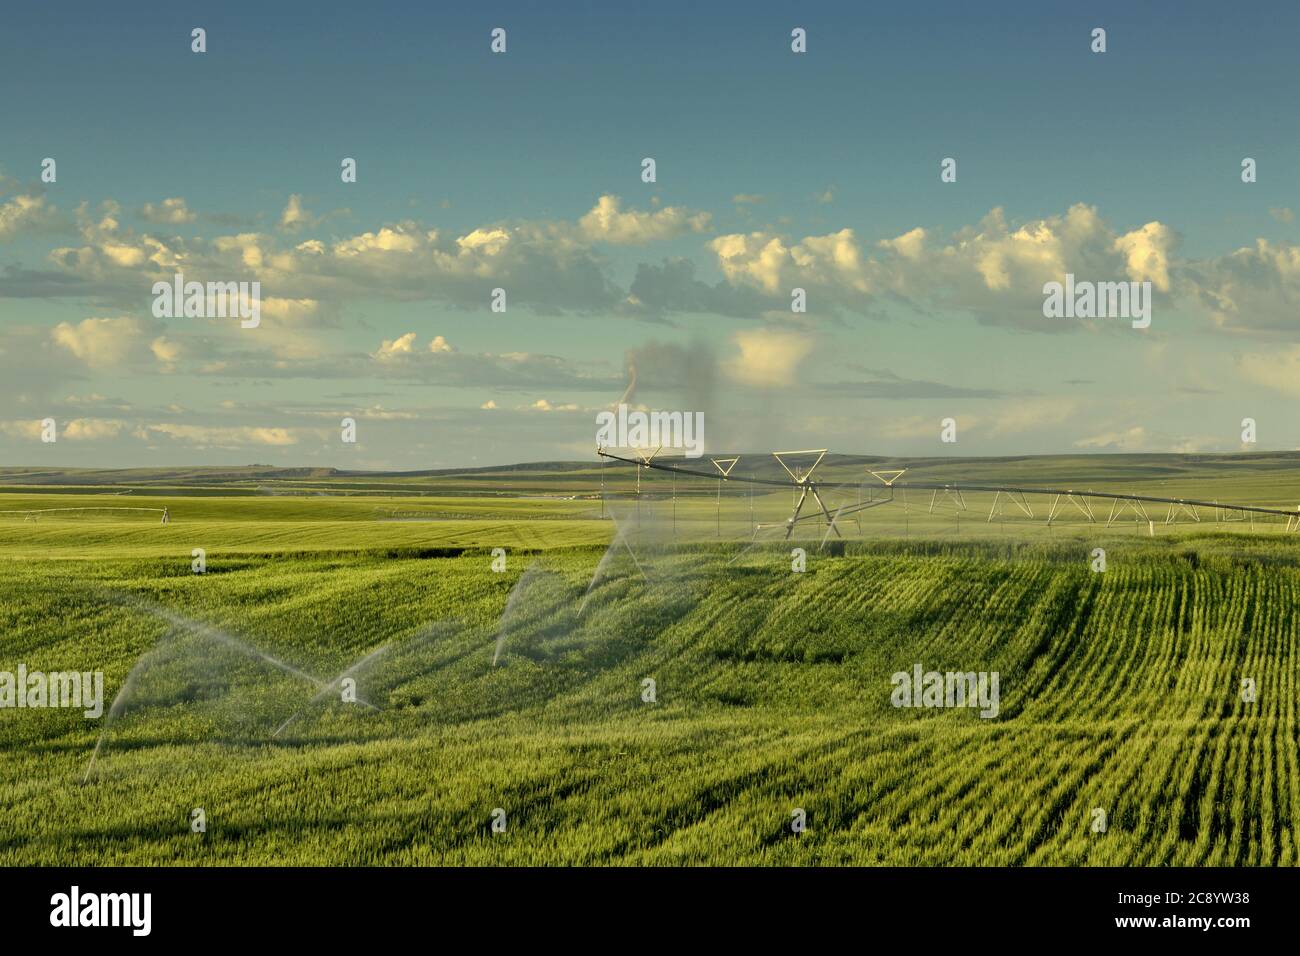 A field of wheat, irrigaated by a ceter pivot sprinkler system, growing in the fertile farm fields of Idaho. Stock Photo